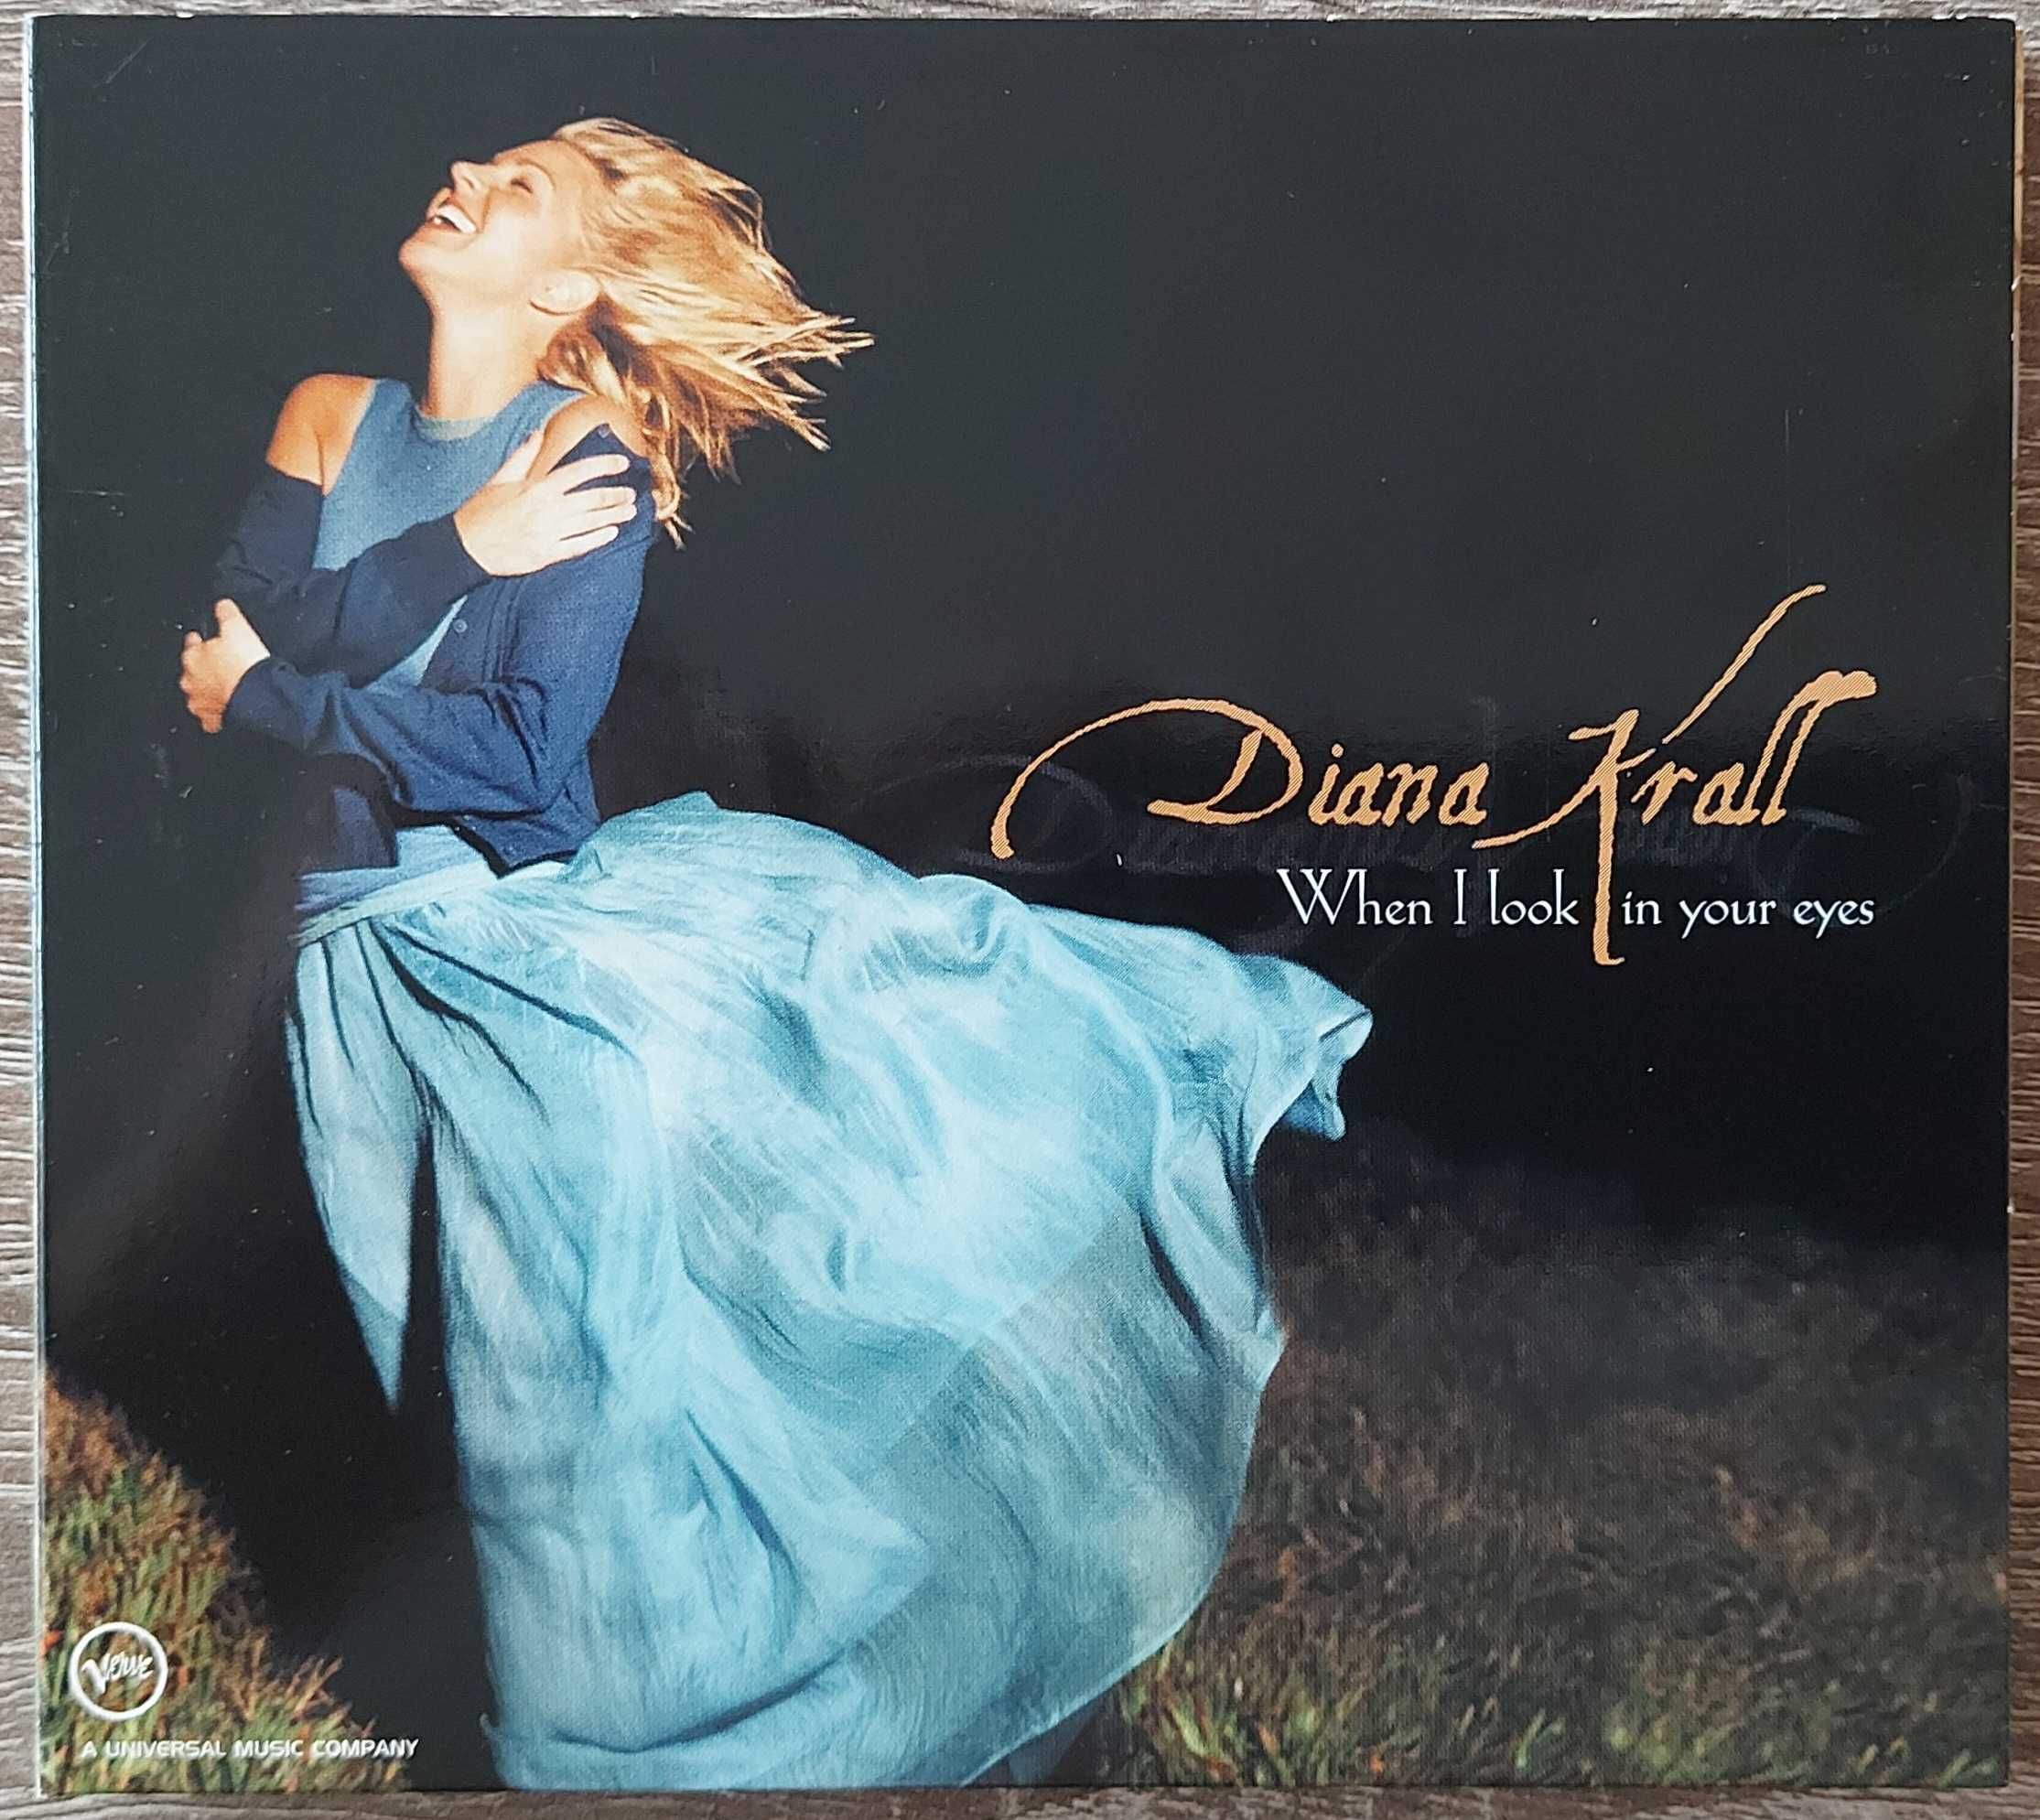 Diana Krall – When I Look In Your Eyes